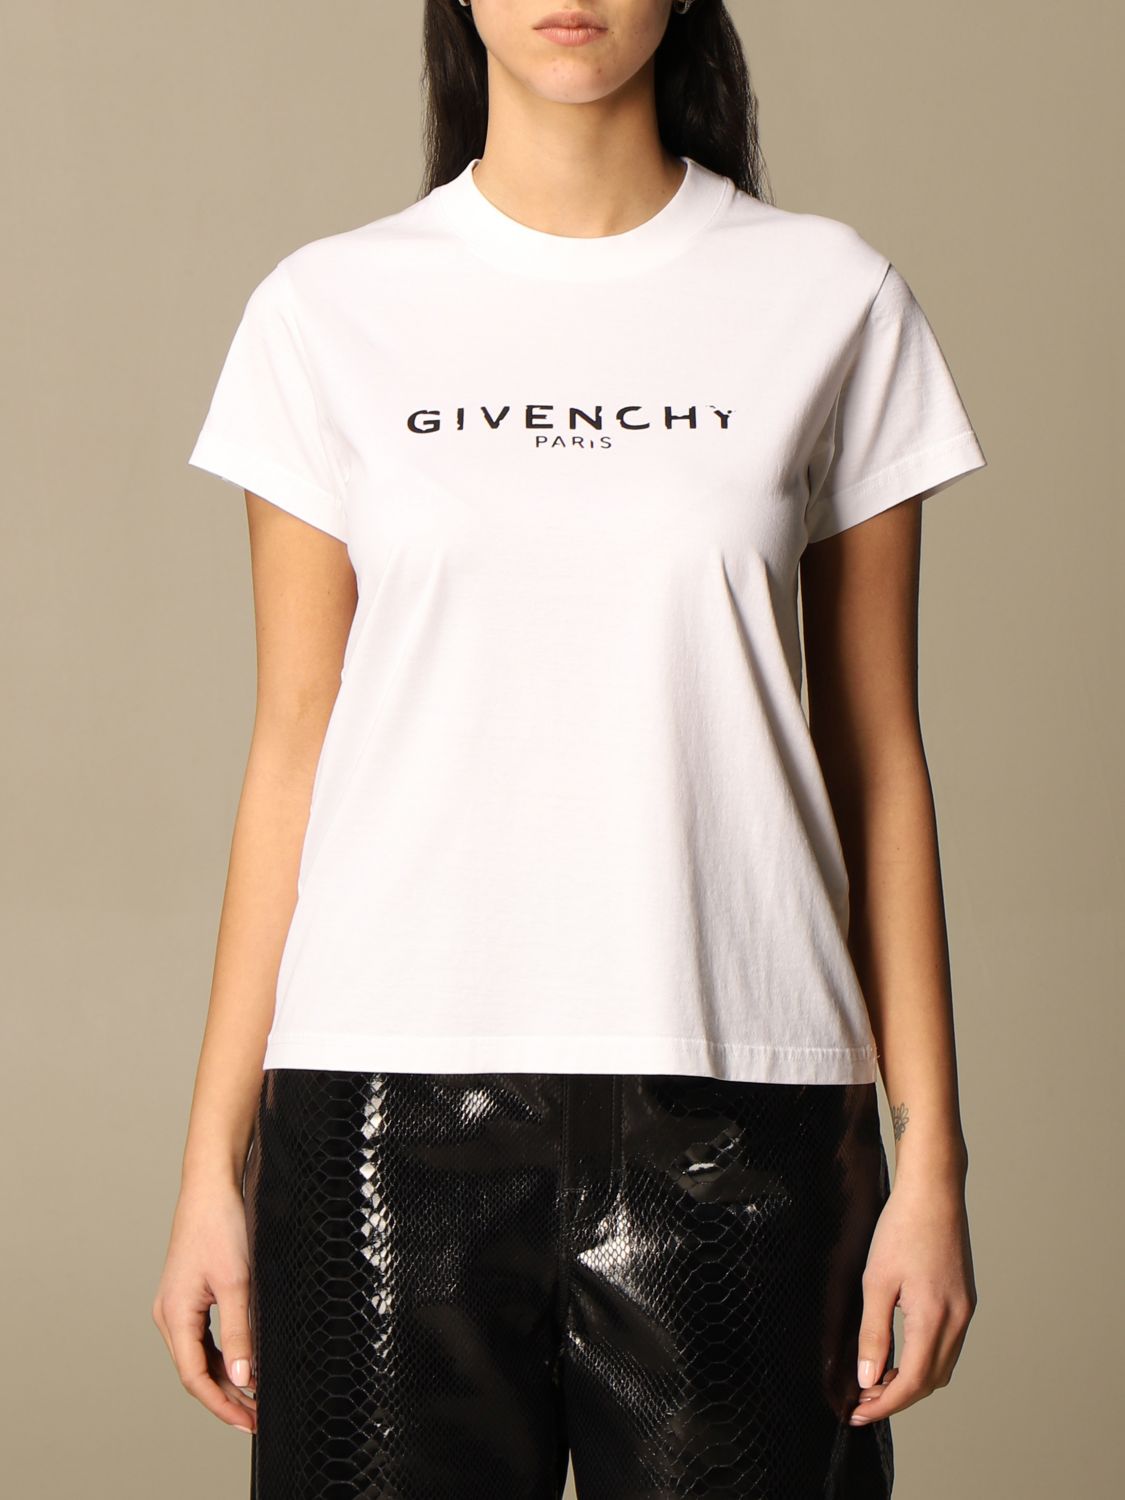 givenchy women